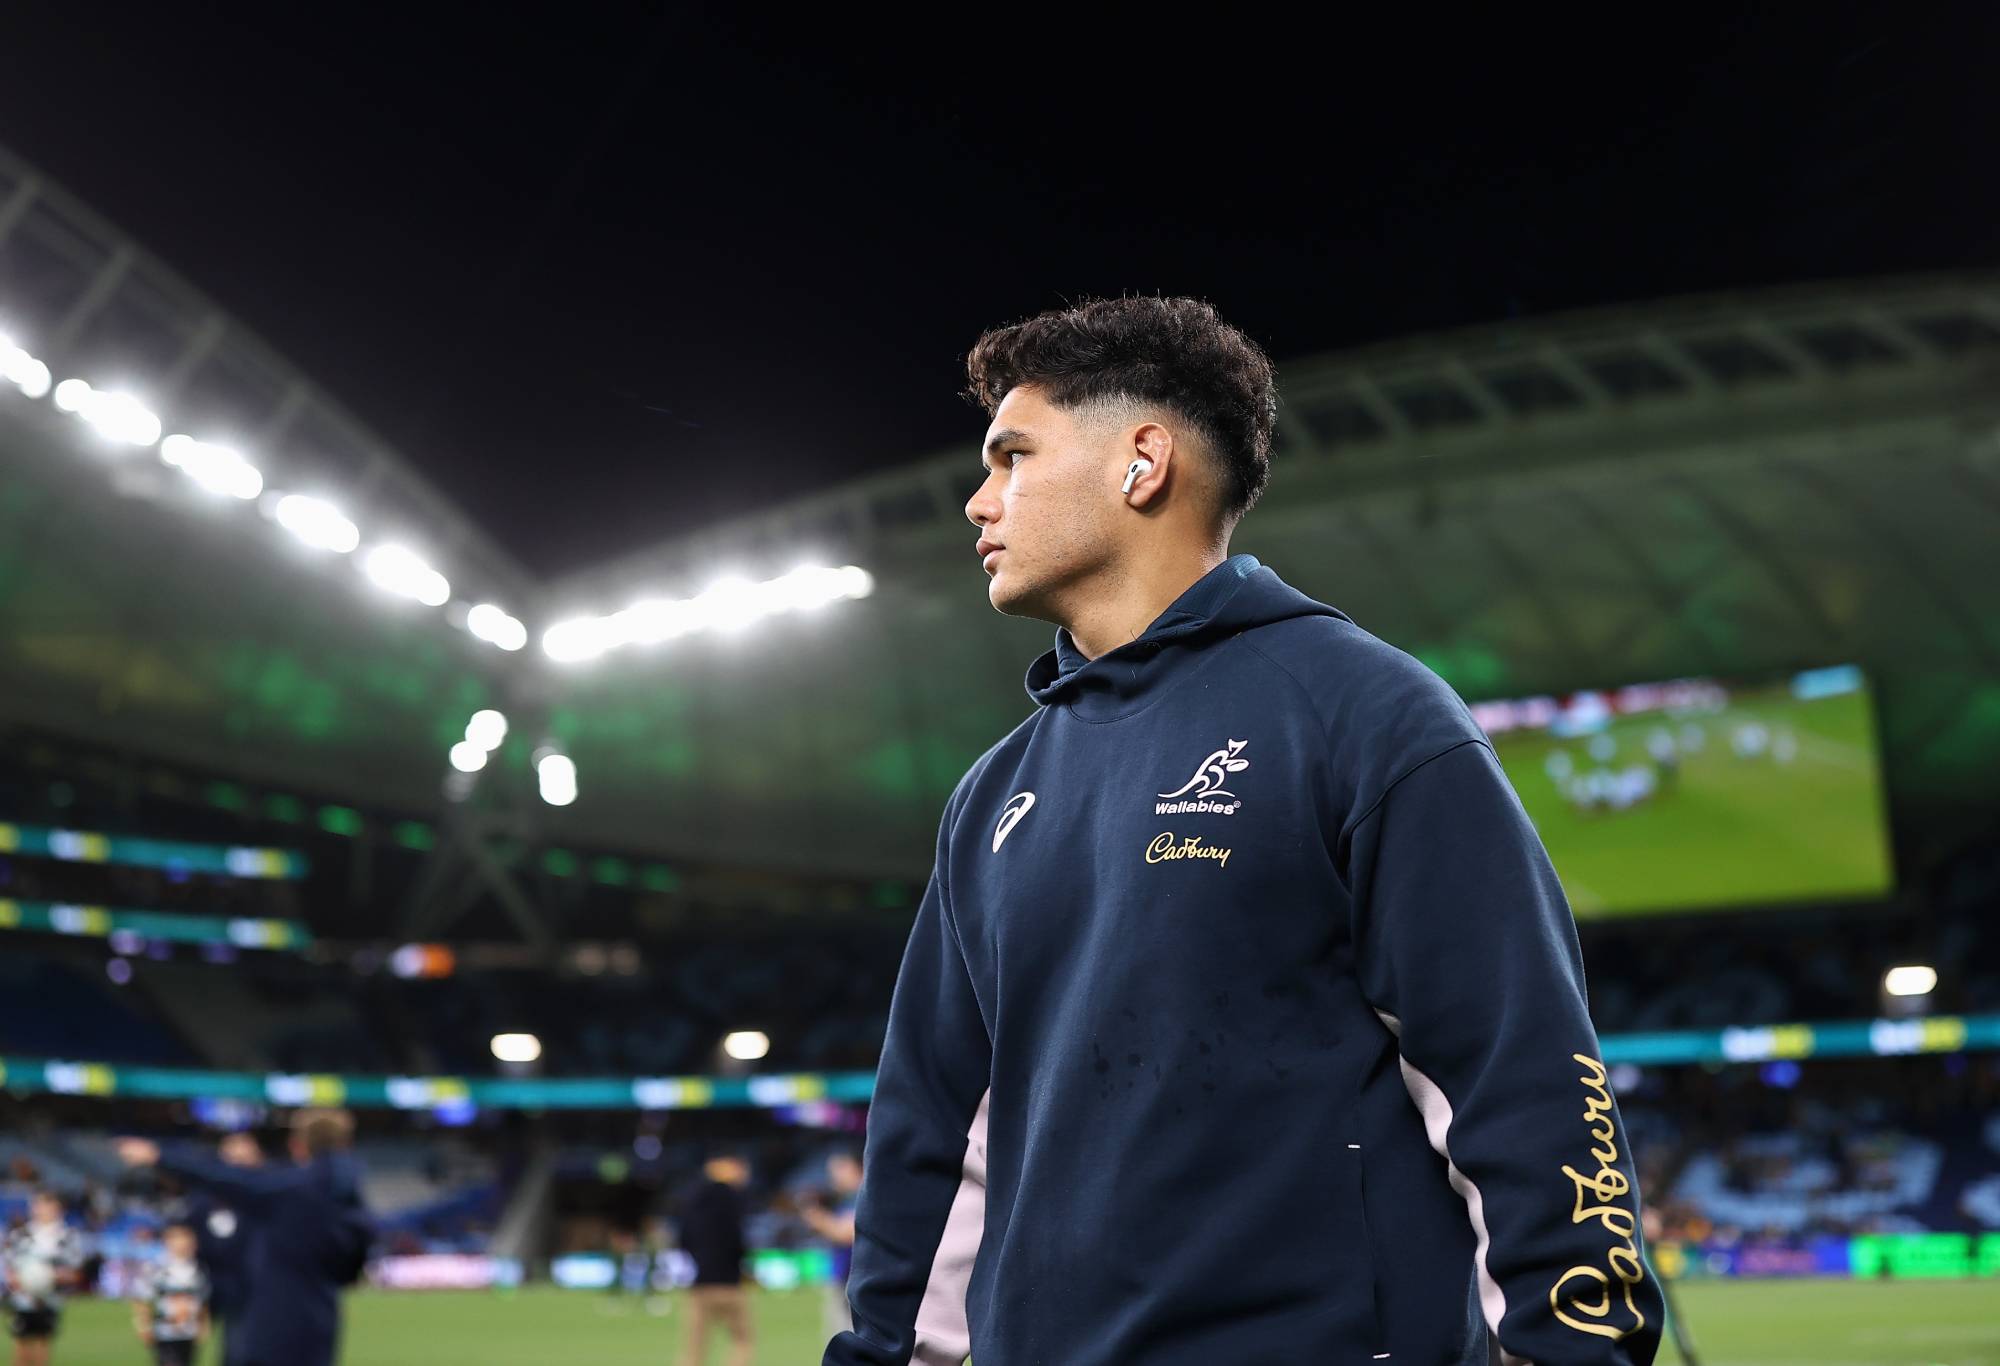 Noah Lolesio of the Wallabies inspects the pitch ahead of The Rugby Championship match between the Australia Wallabies and South Africa Springboks at Allianz Stadium on September 03, 2022 in Sydney, Australia. (Photo by Cameron Spencer/Getty Images)